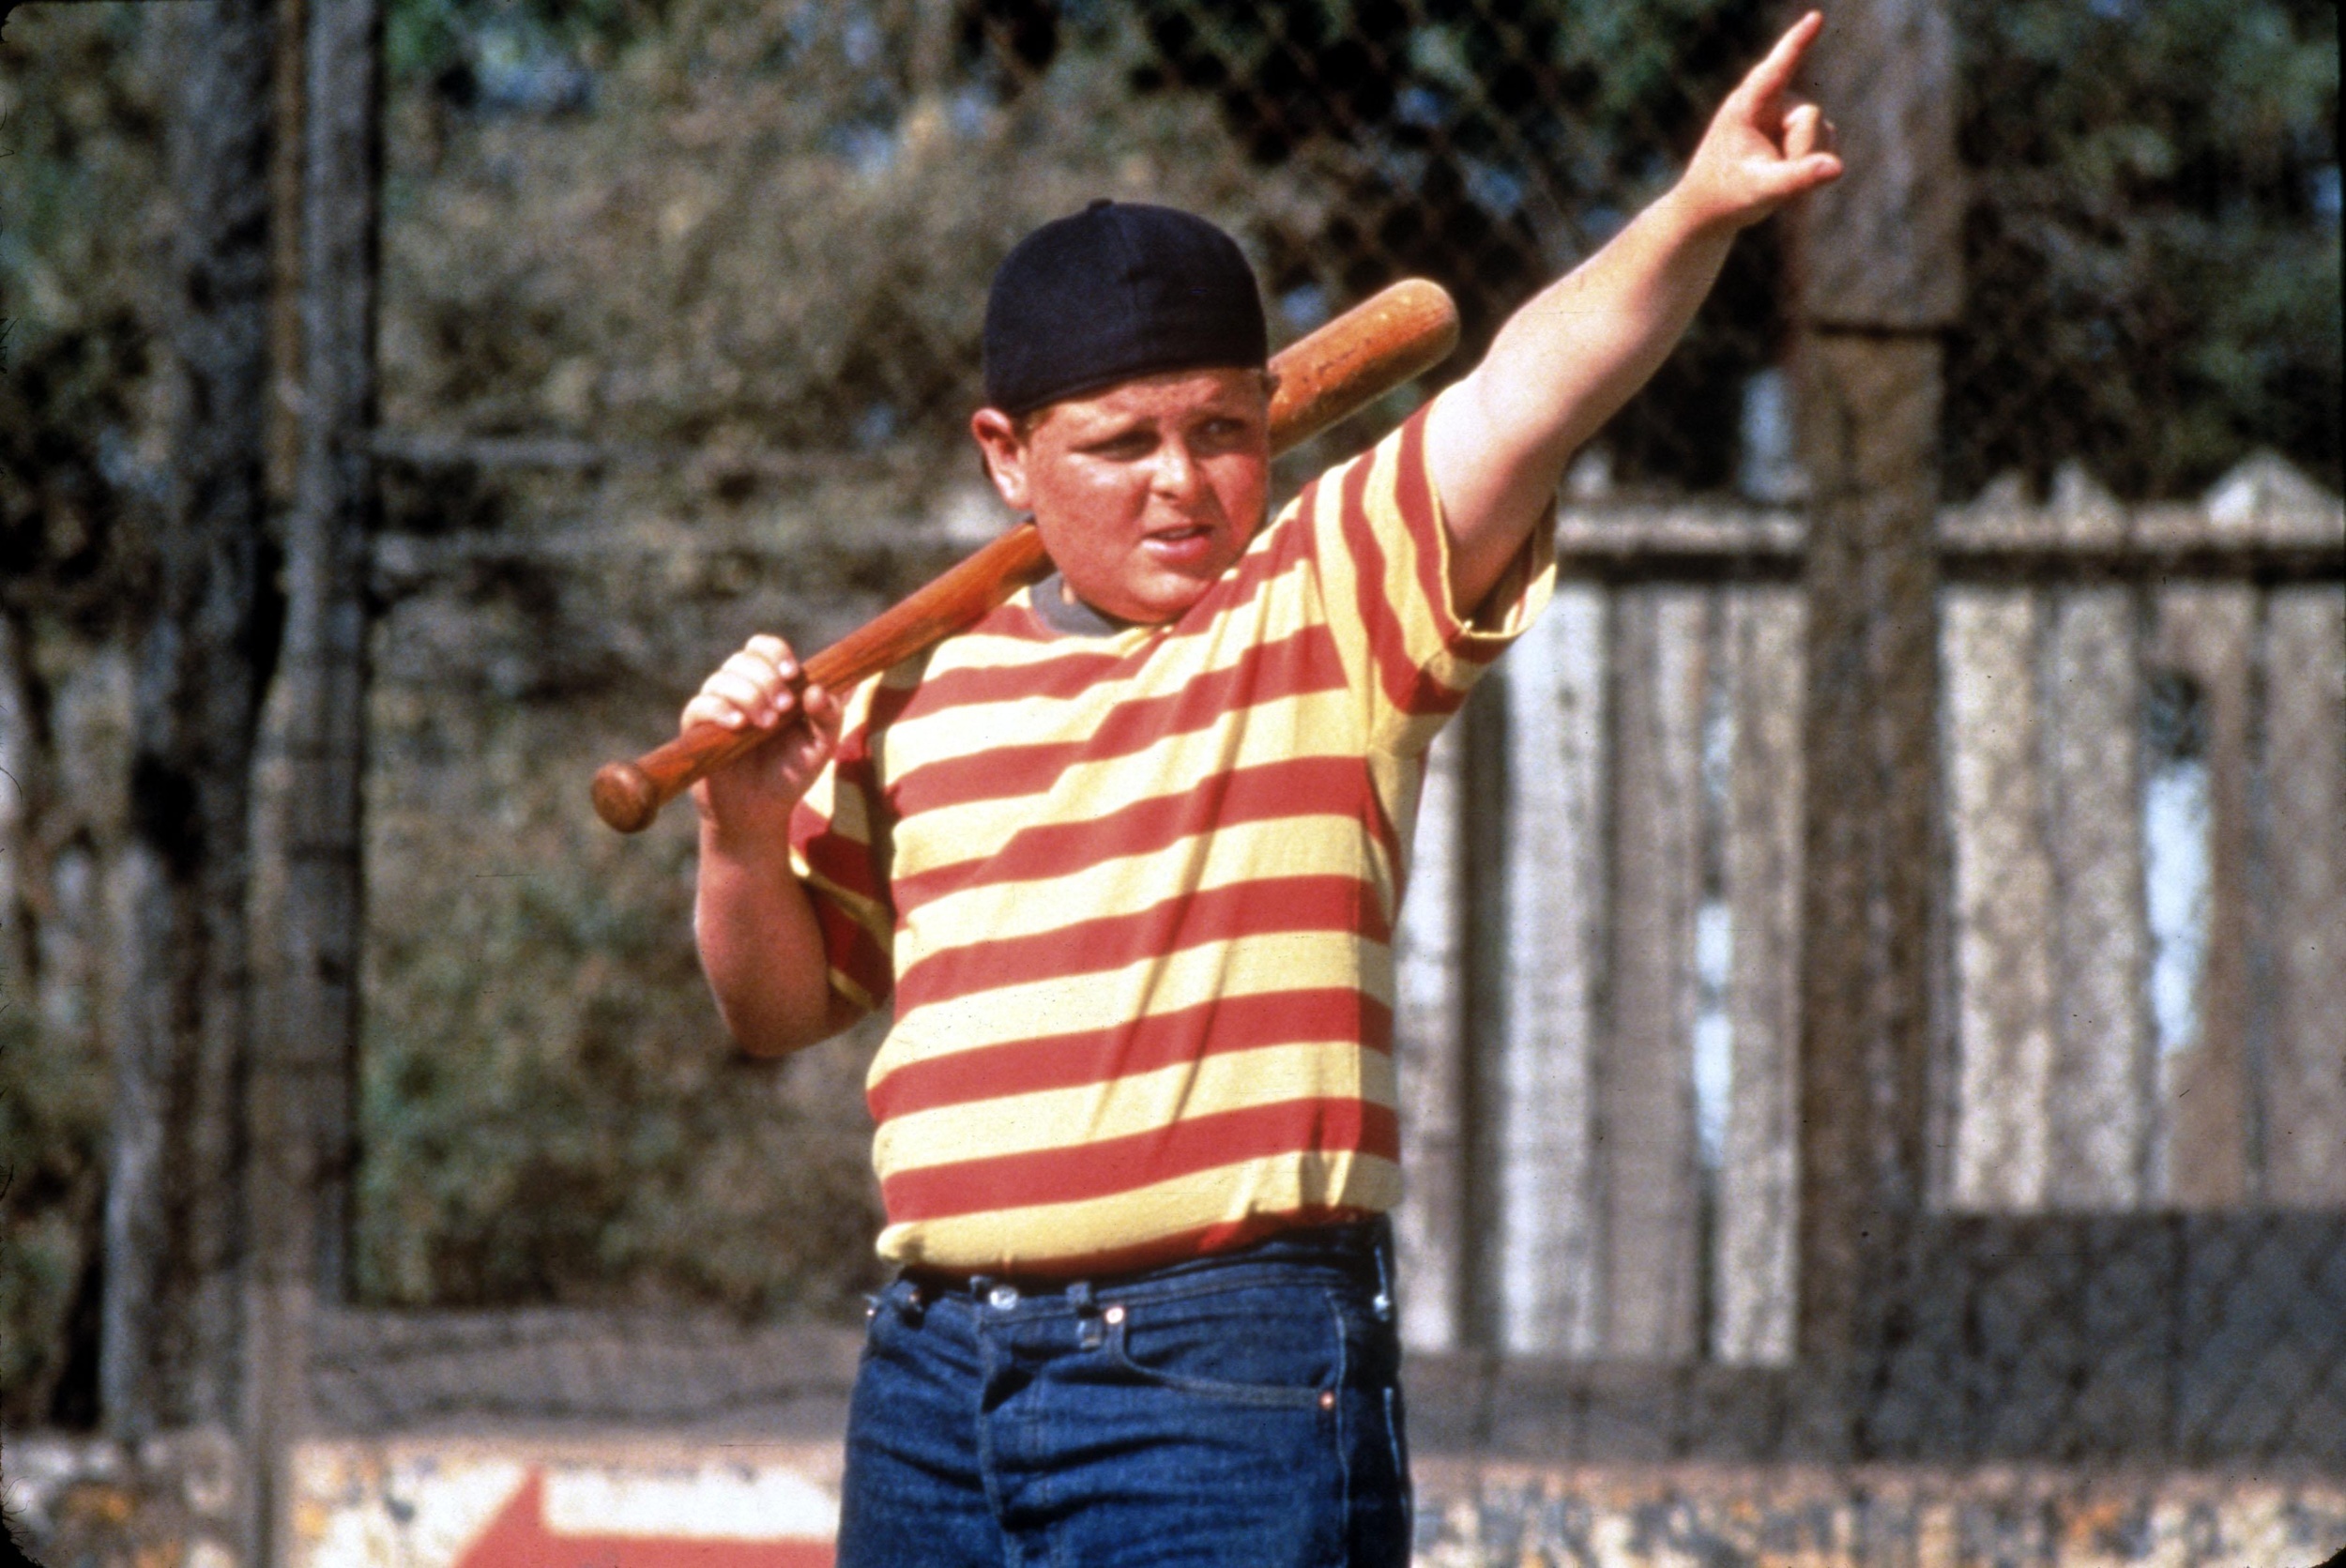 <p>Every generation has those few films that will stick with them forever and never fail to take them back to a time and place, and for millennials, one of those is <em>The Sandlot</em>. Its perfectly balanced plot combined the beauty of friendships and a silly storyline, and that made it a must-have at slumber parties since 1993.</p><p>You may also like: <a href='https://www.yardbarker.com/entertainment/articles/the_25_best_songs_about_breakups_020624/s1__31296587'>The 25 best songs about breakups</a></p>